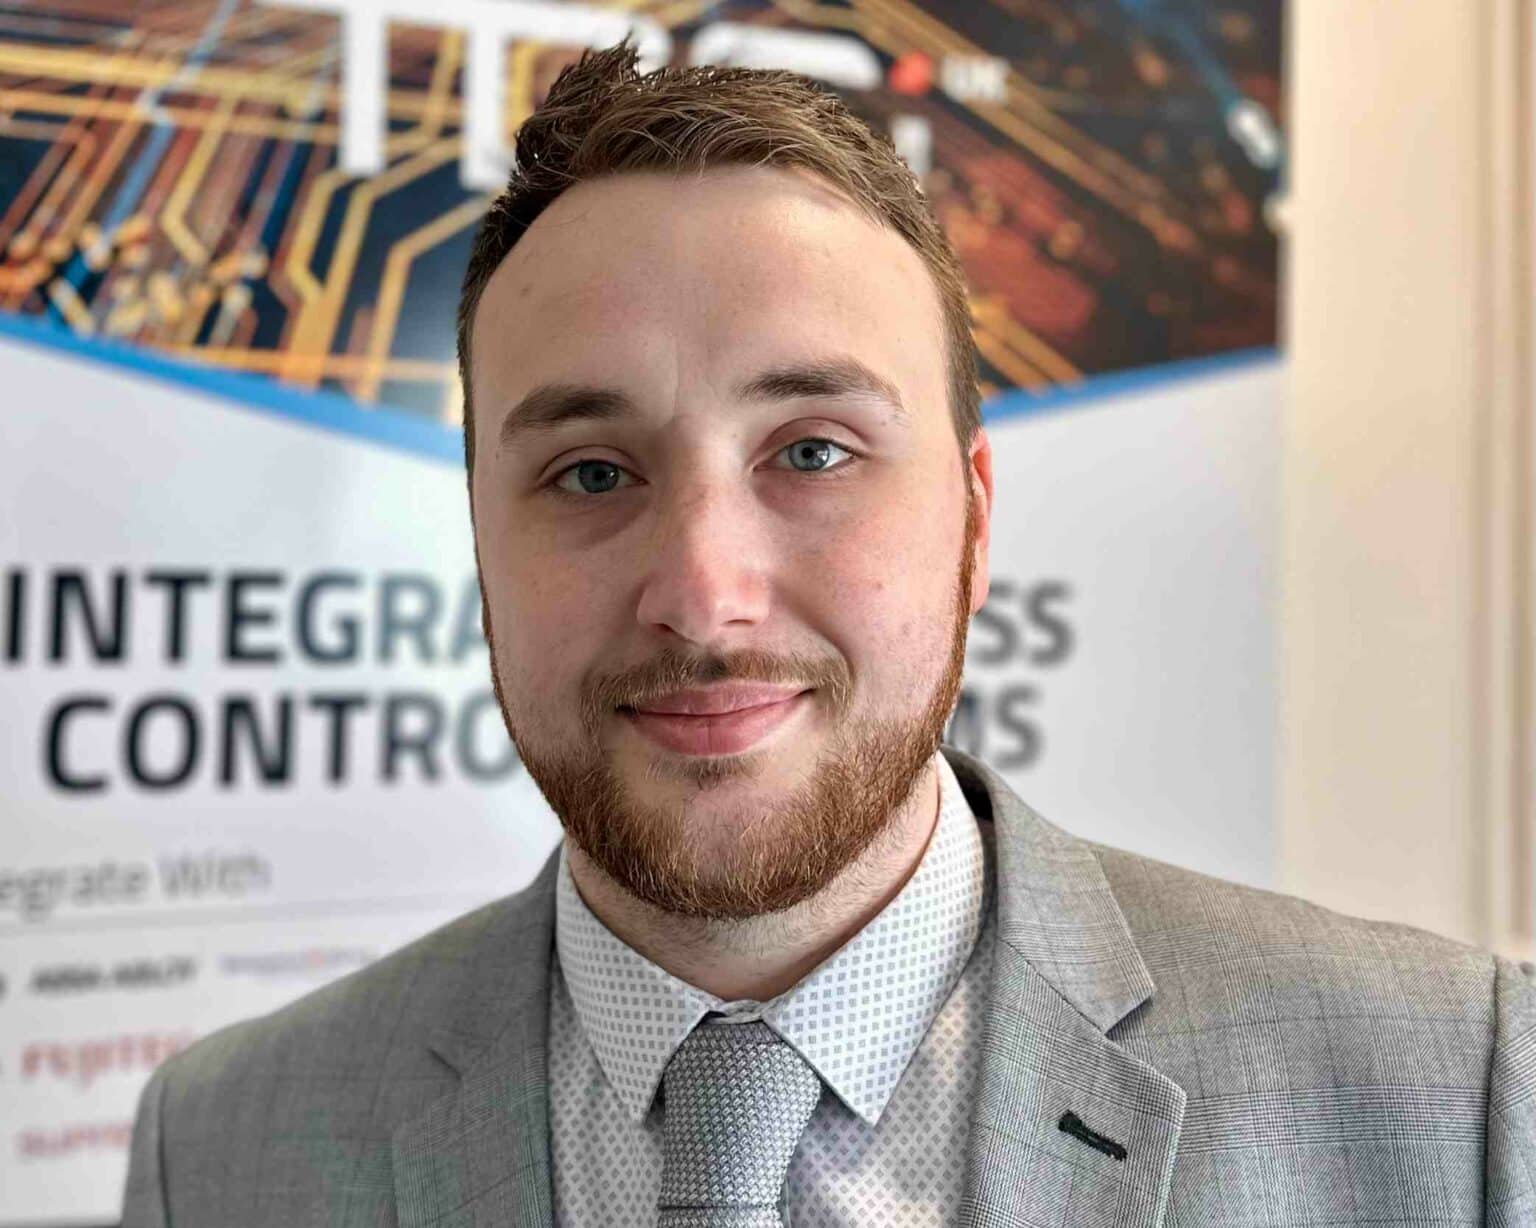 UK Distribution Salesperson appointed by TDSi